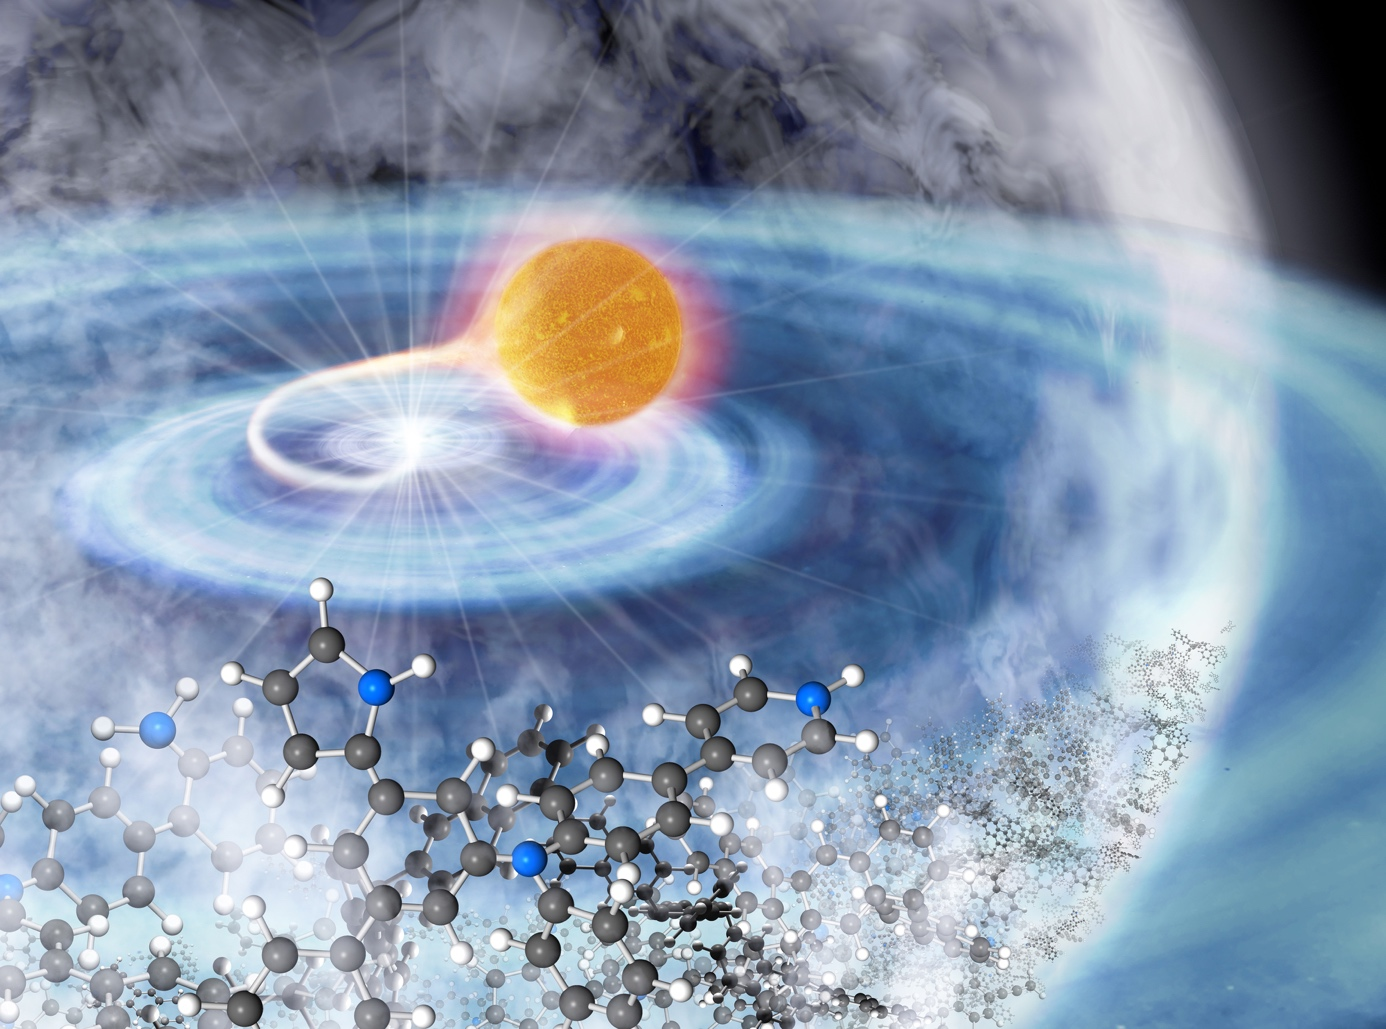 Successful synthesis of organic dust produced in nova explosions